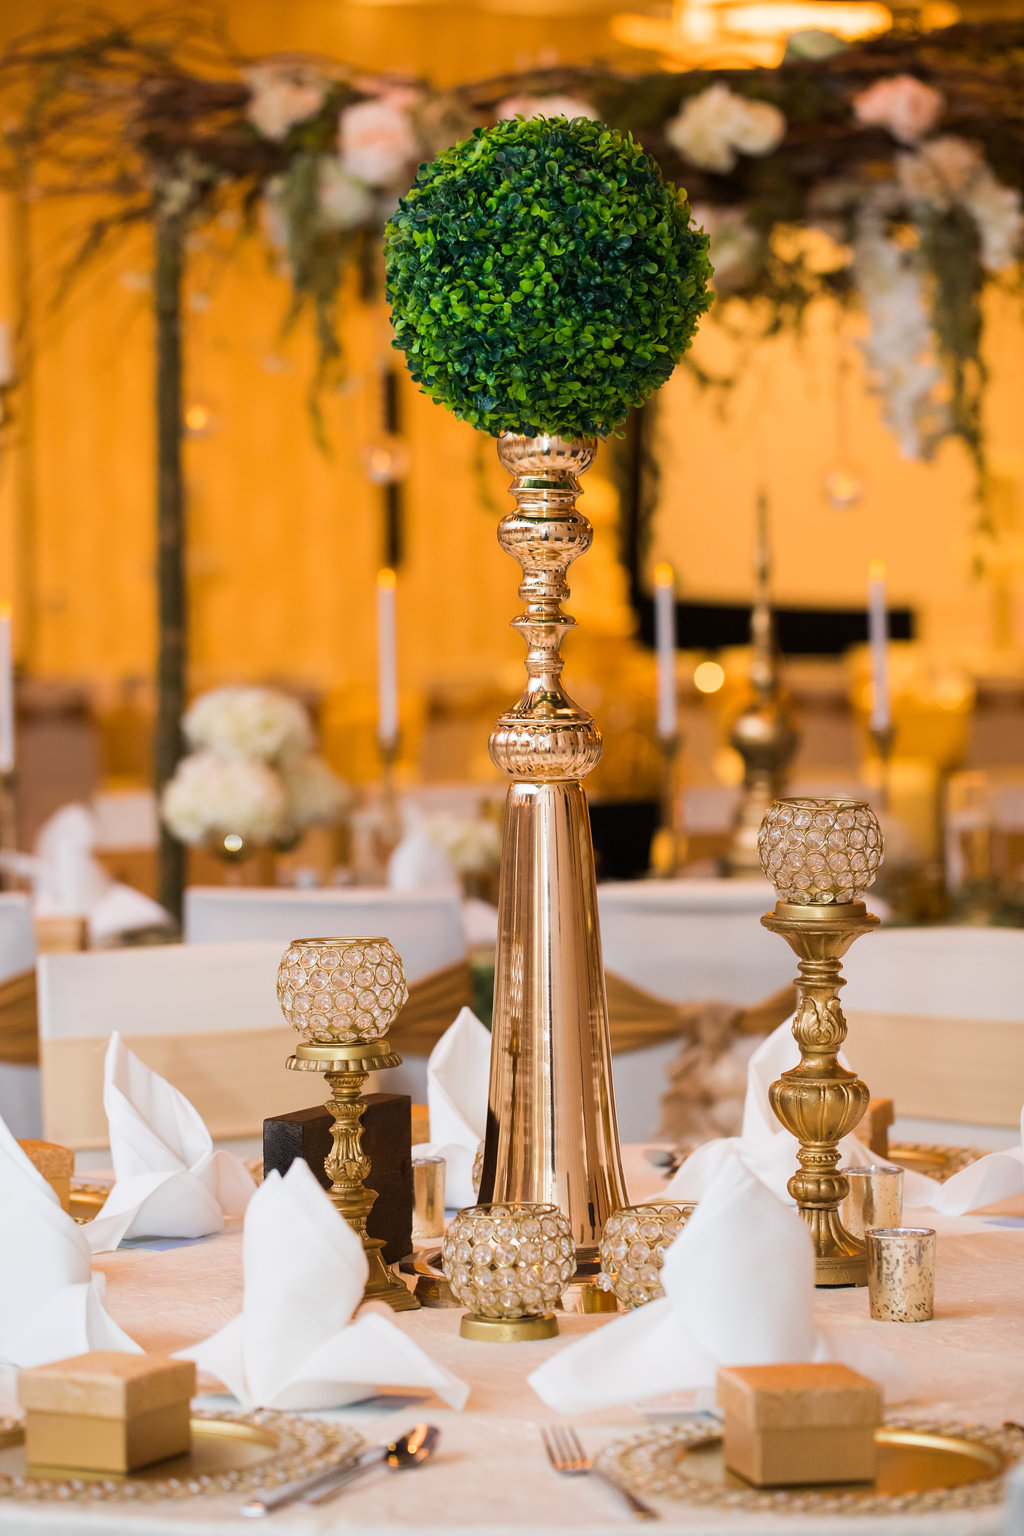 Glamorous Traditional Indian Wedding Hotel Ballroom Reception Decor, Tall Gold Vase with Round Greenery Plant, Gold Candlesticks, Gold Chargers and Party Favor Boxes